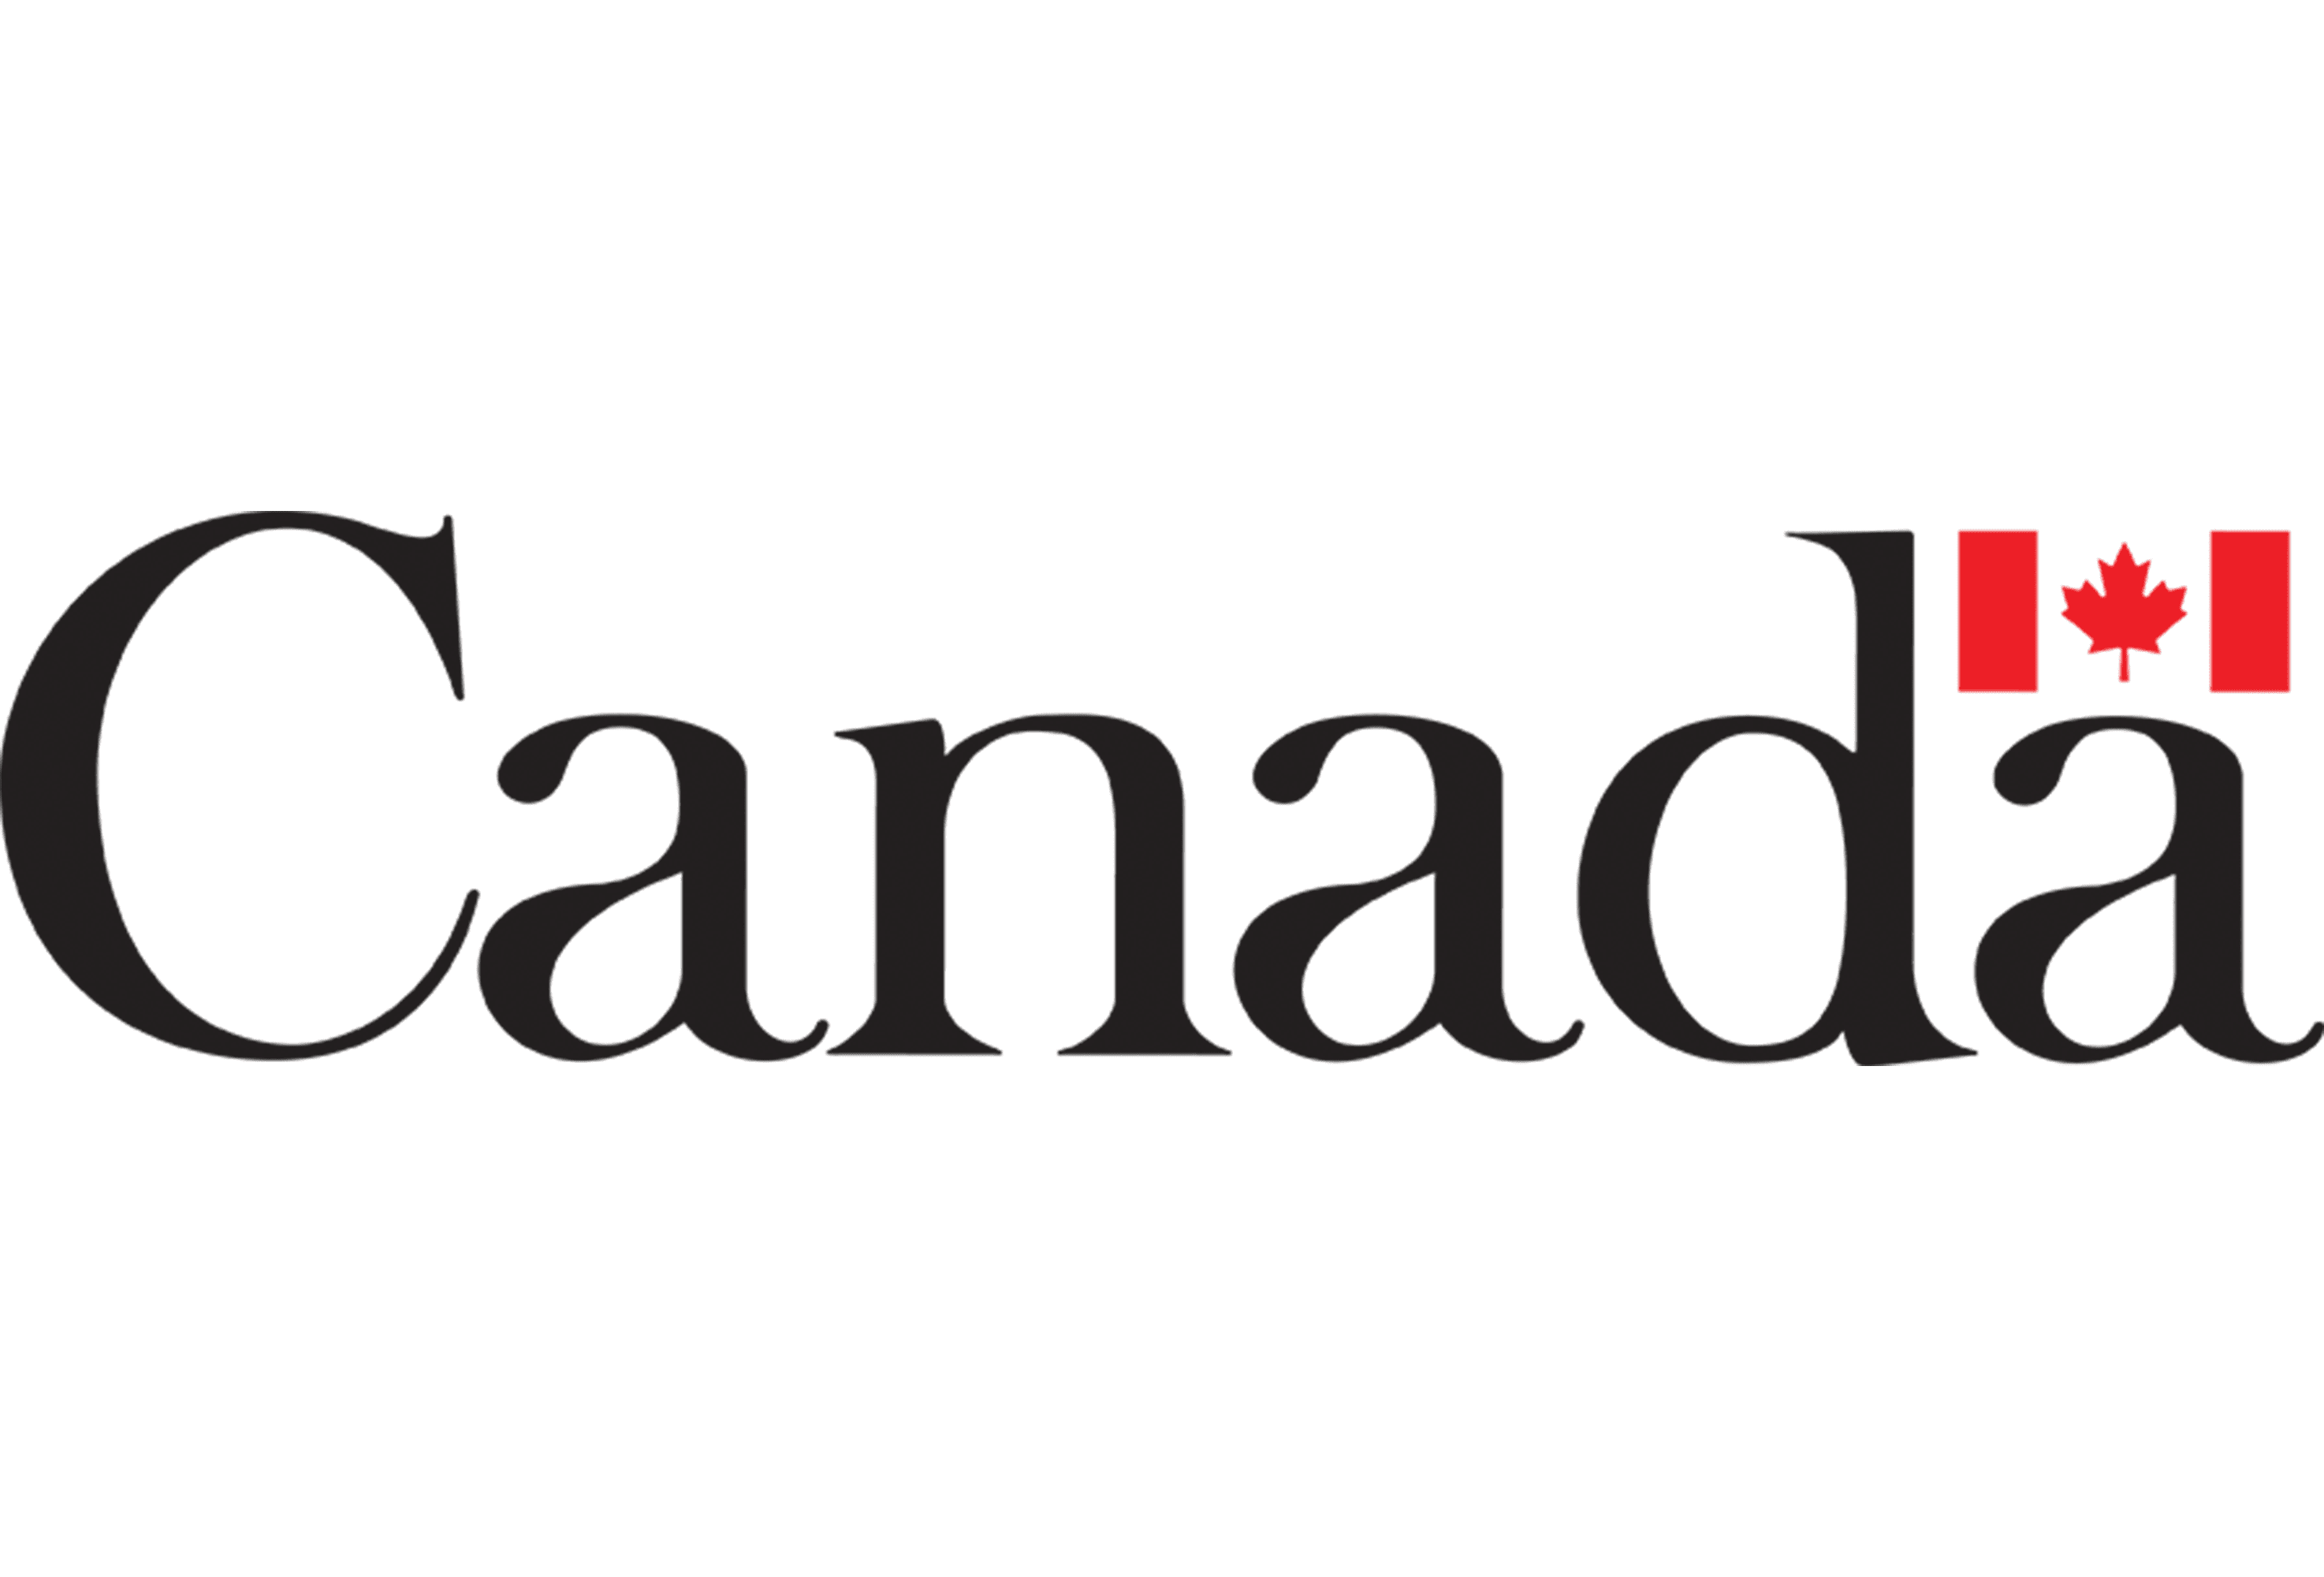 Government of Canada Logo and symbol, meaning, history, PNG